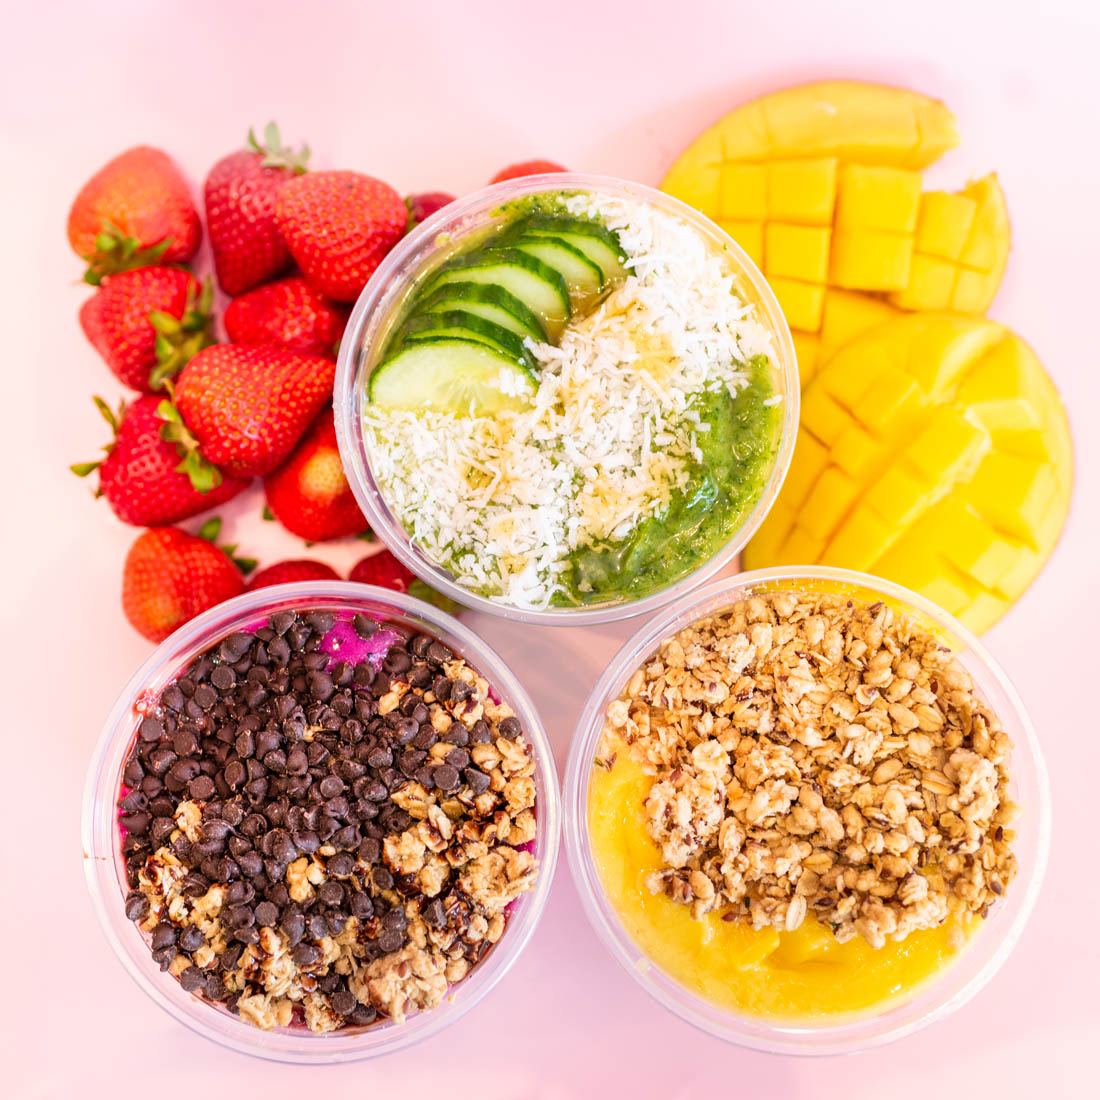 Rush Bowls smoothie bowls nutrition info in Arvada, CO.